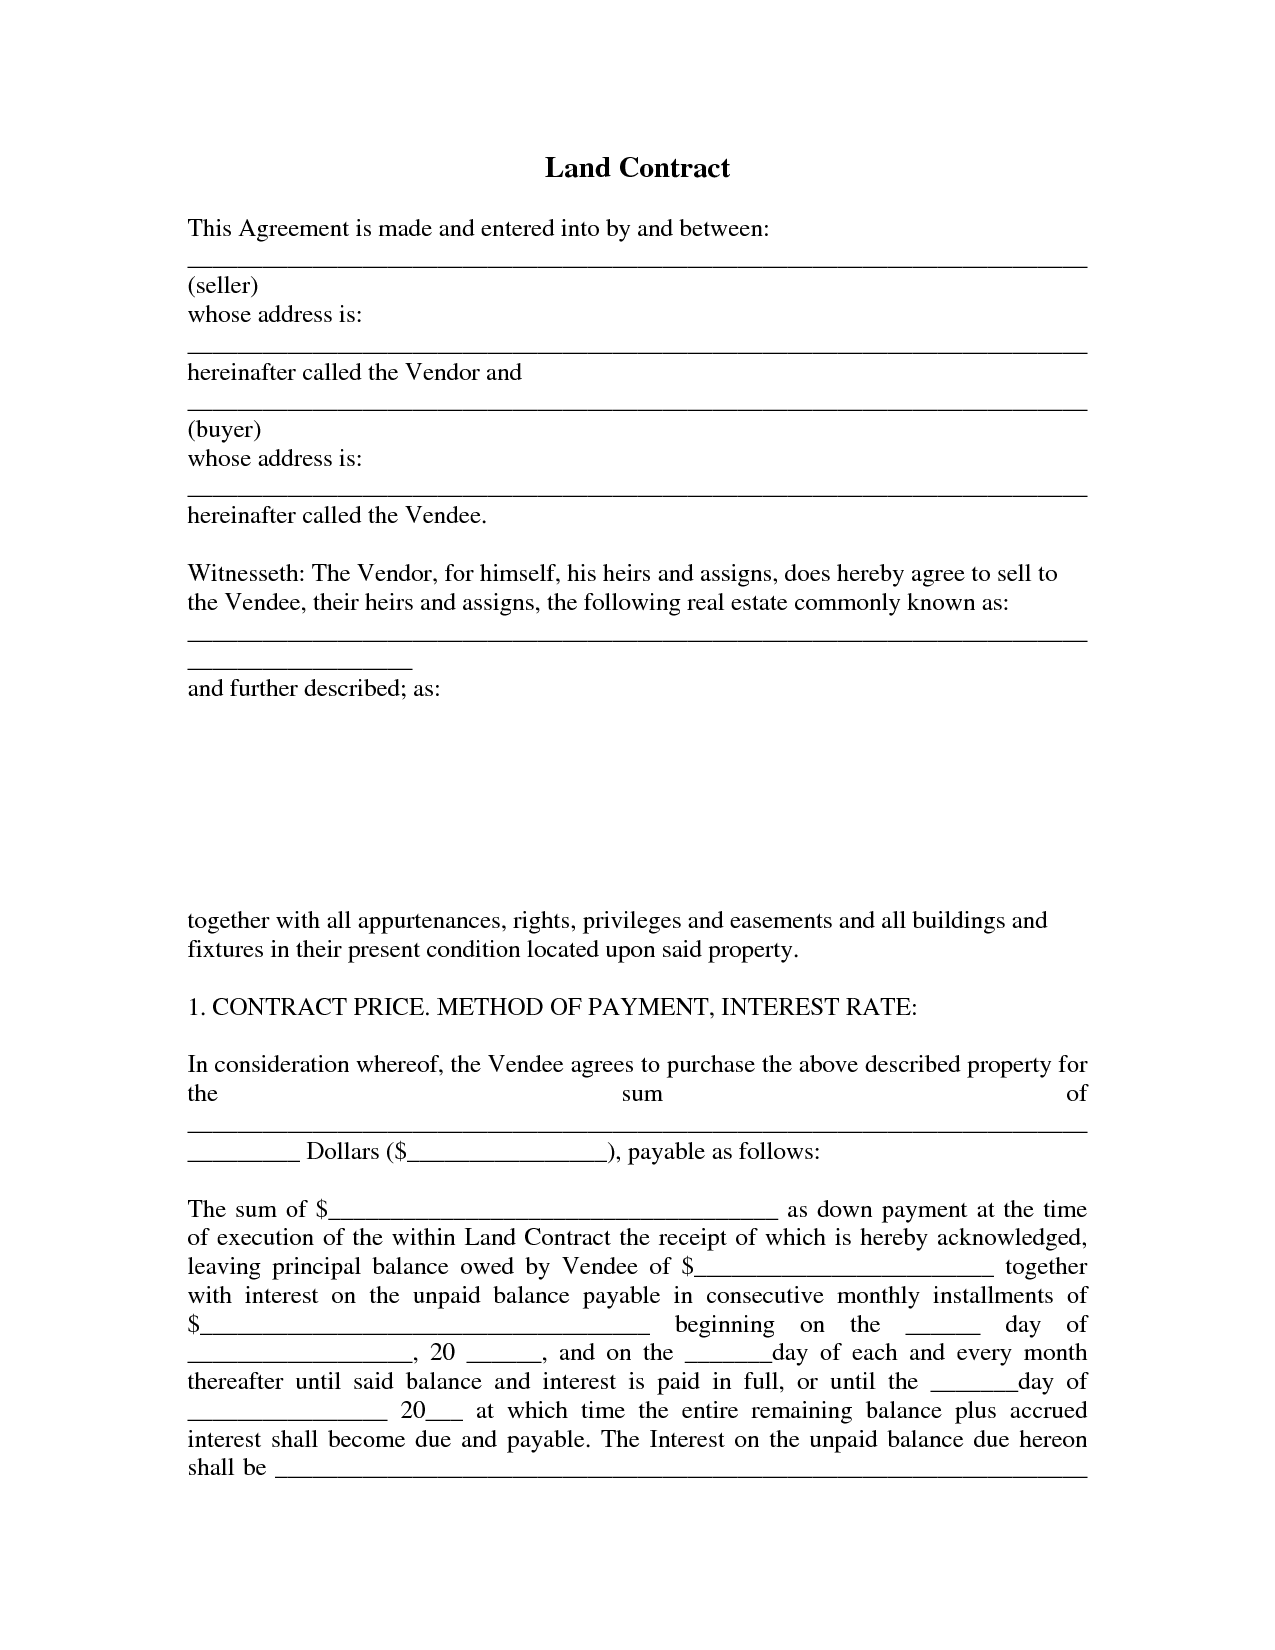 7+ Land Contract Templates   Free Sample,Example Format Download 